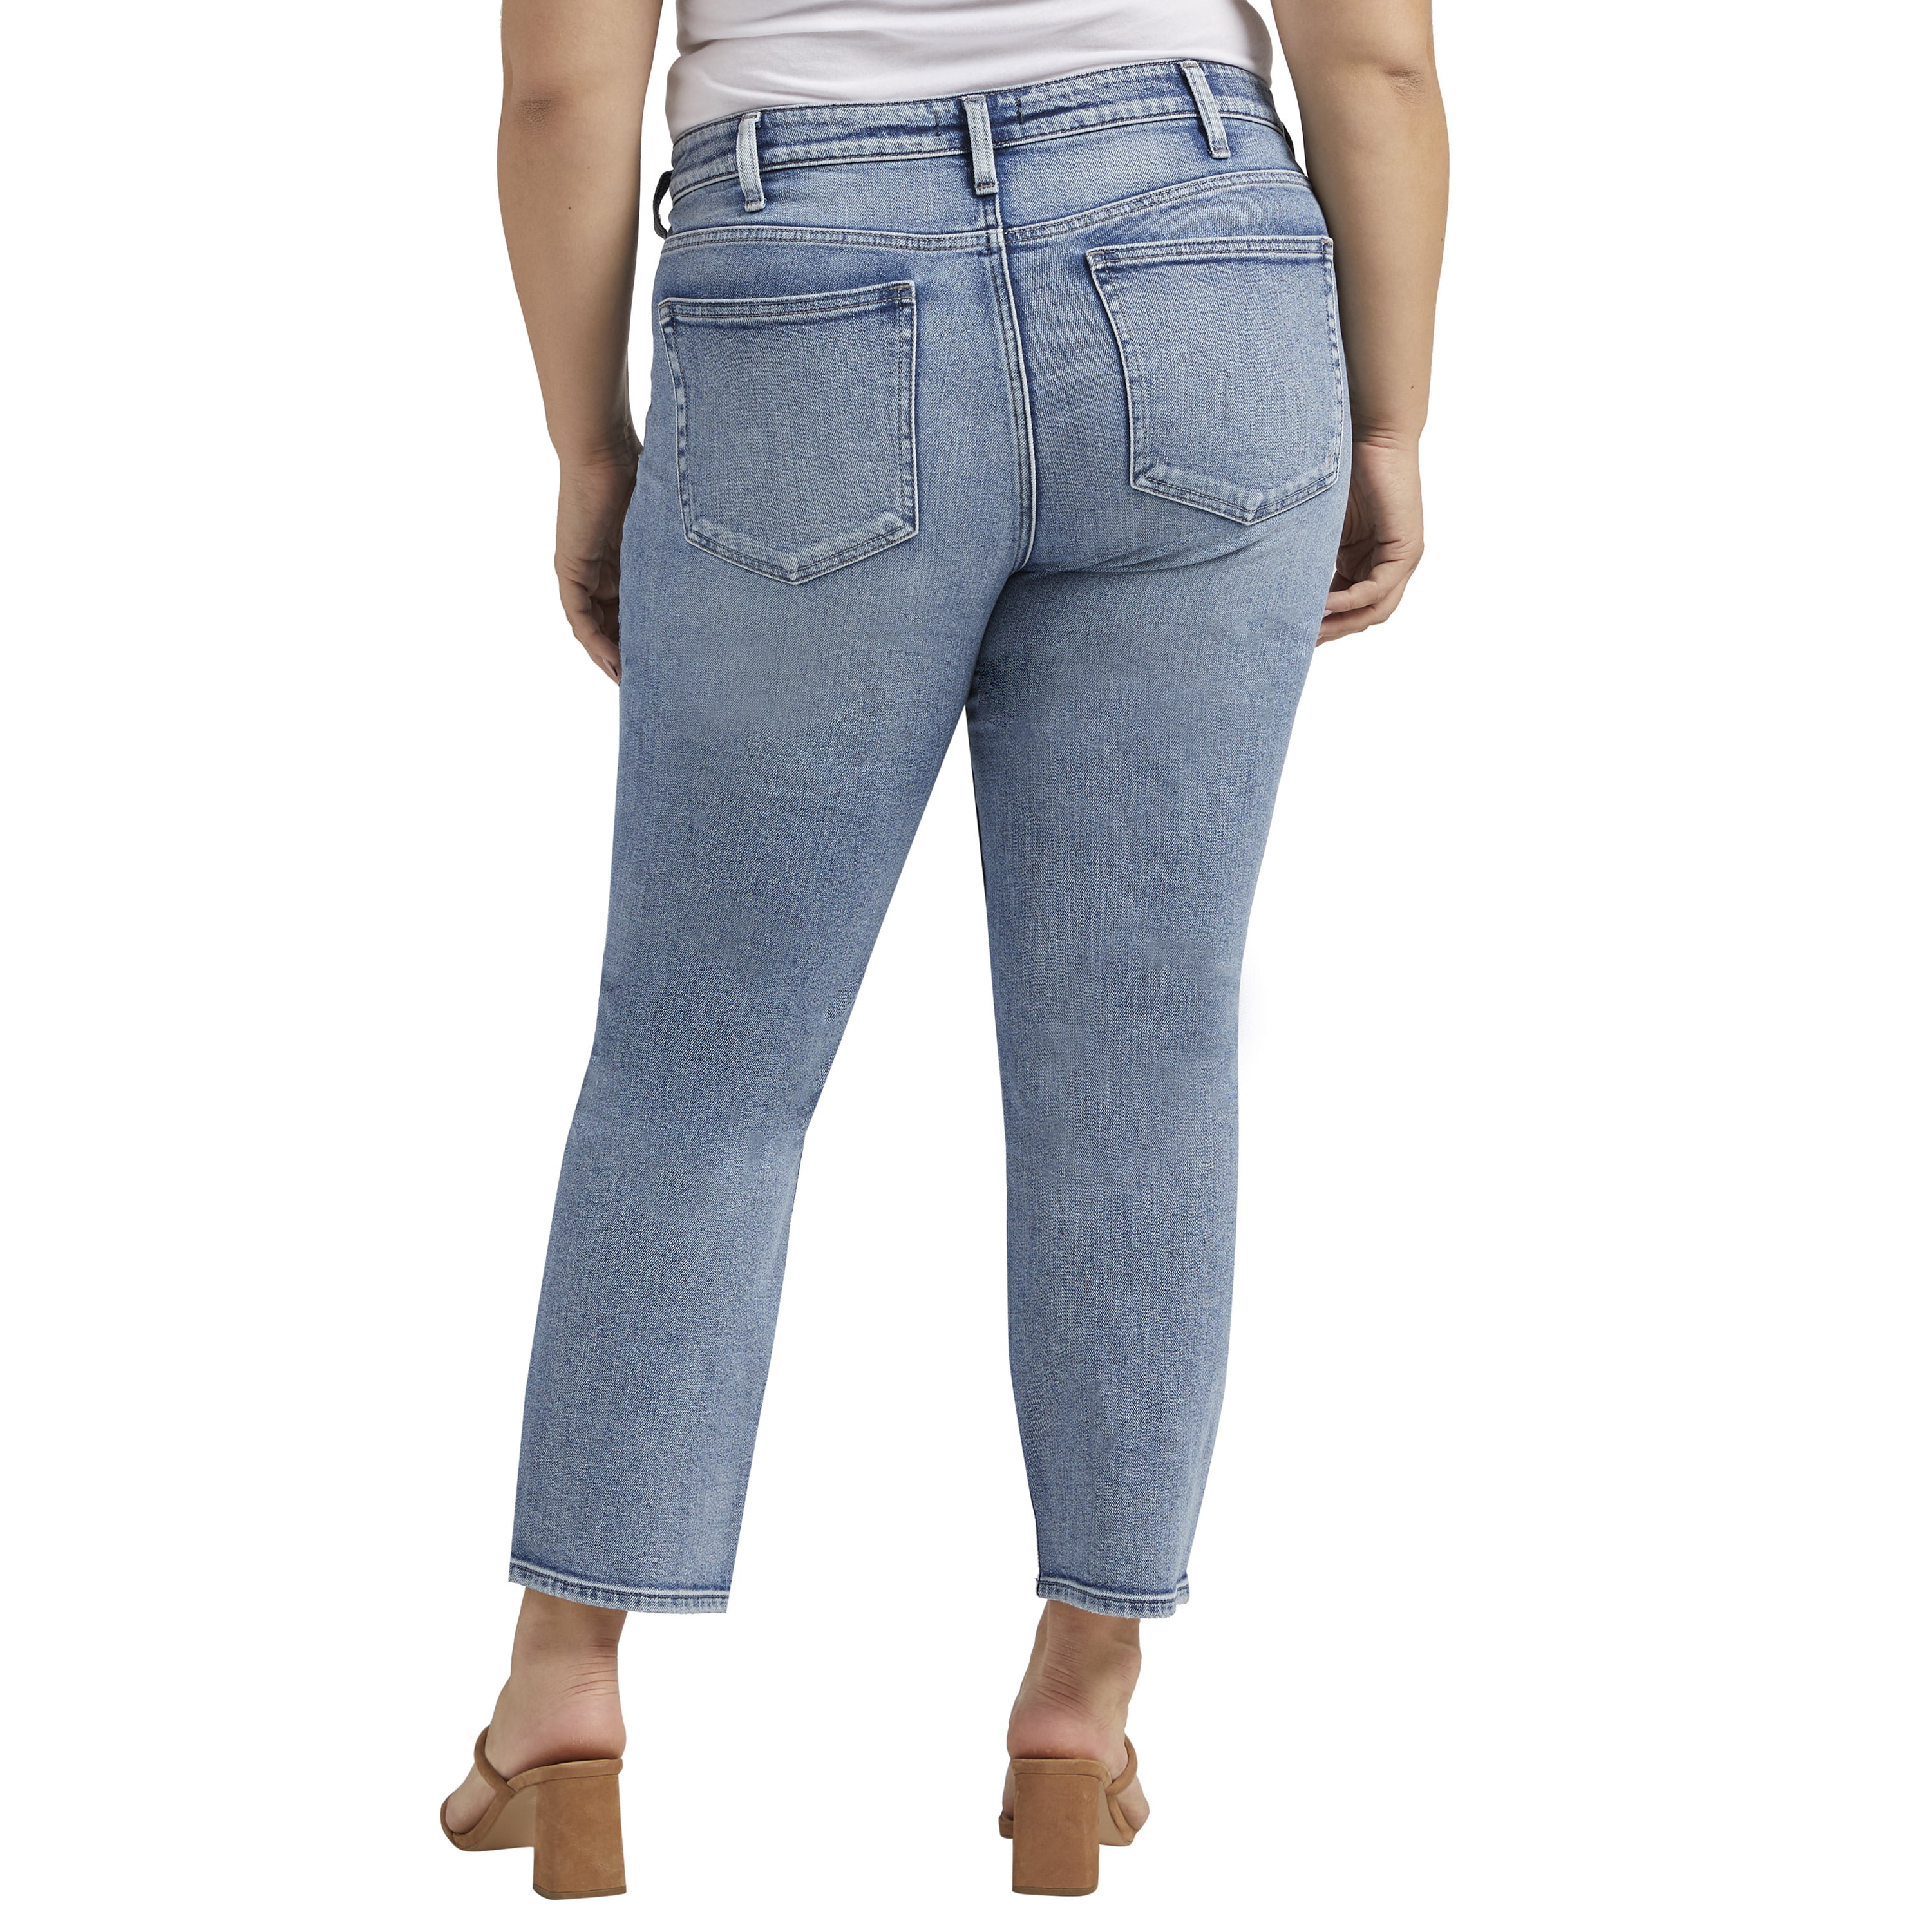 Buy Most Wanted Mid Rise Straight Leg Jeans for CAD 94.00